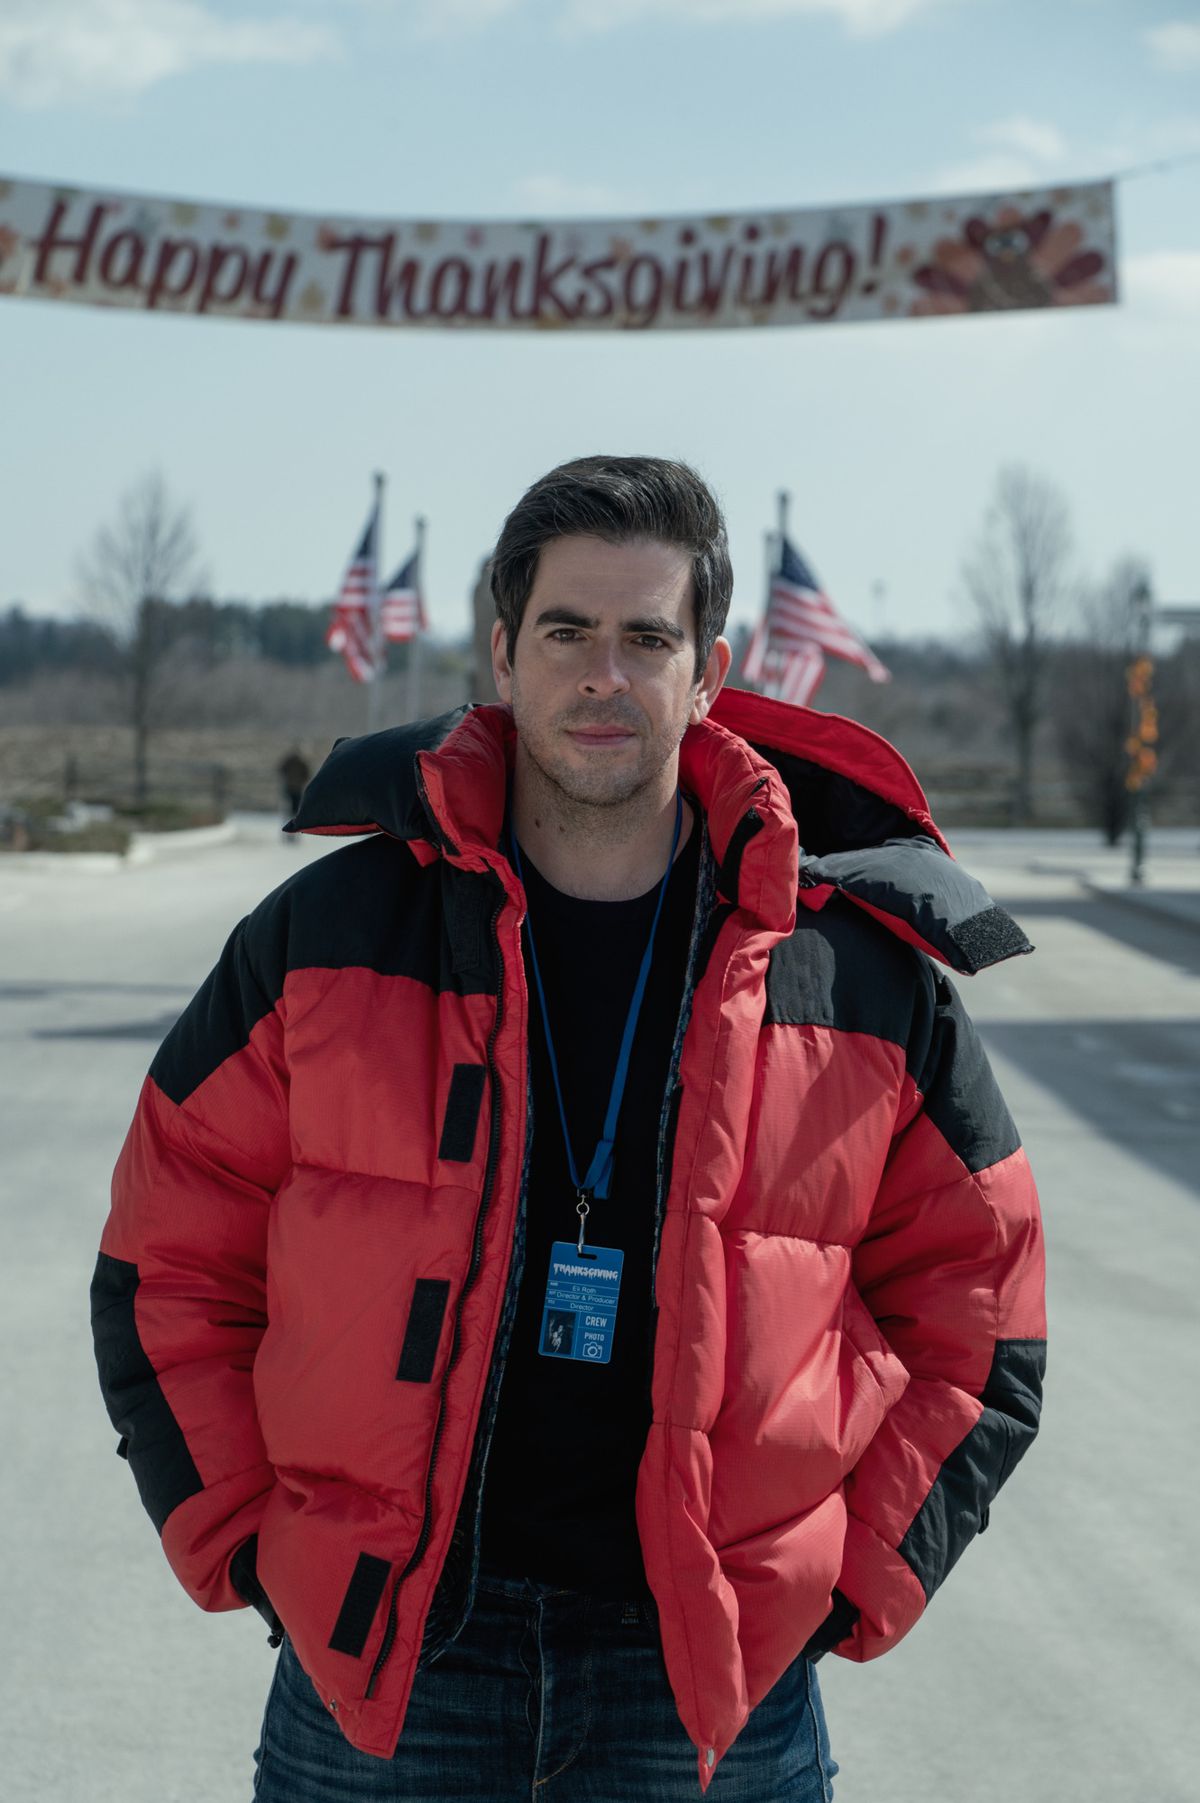 Eli Roth in a red puffy jacket on the set of Thanksgiving with a Happy Thanksgiving banner behind him